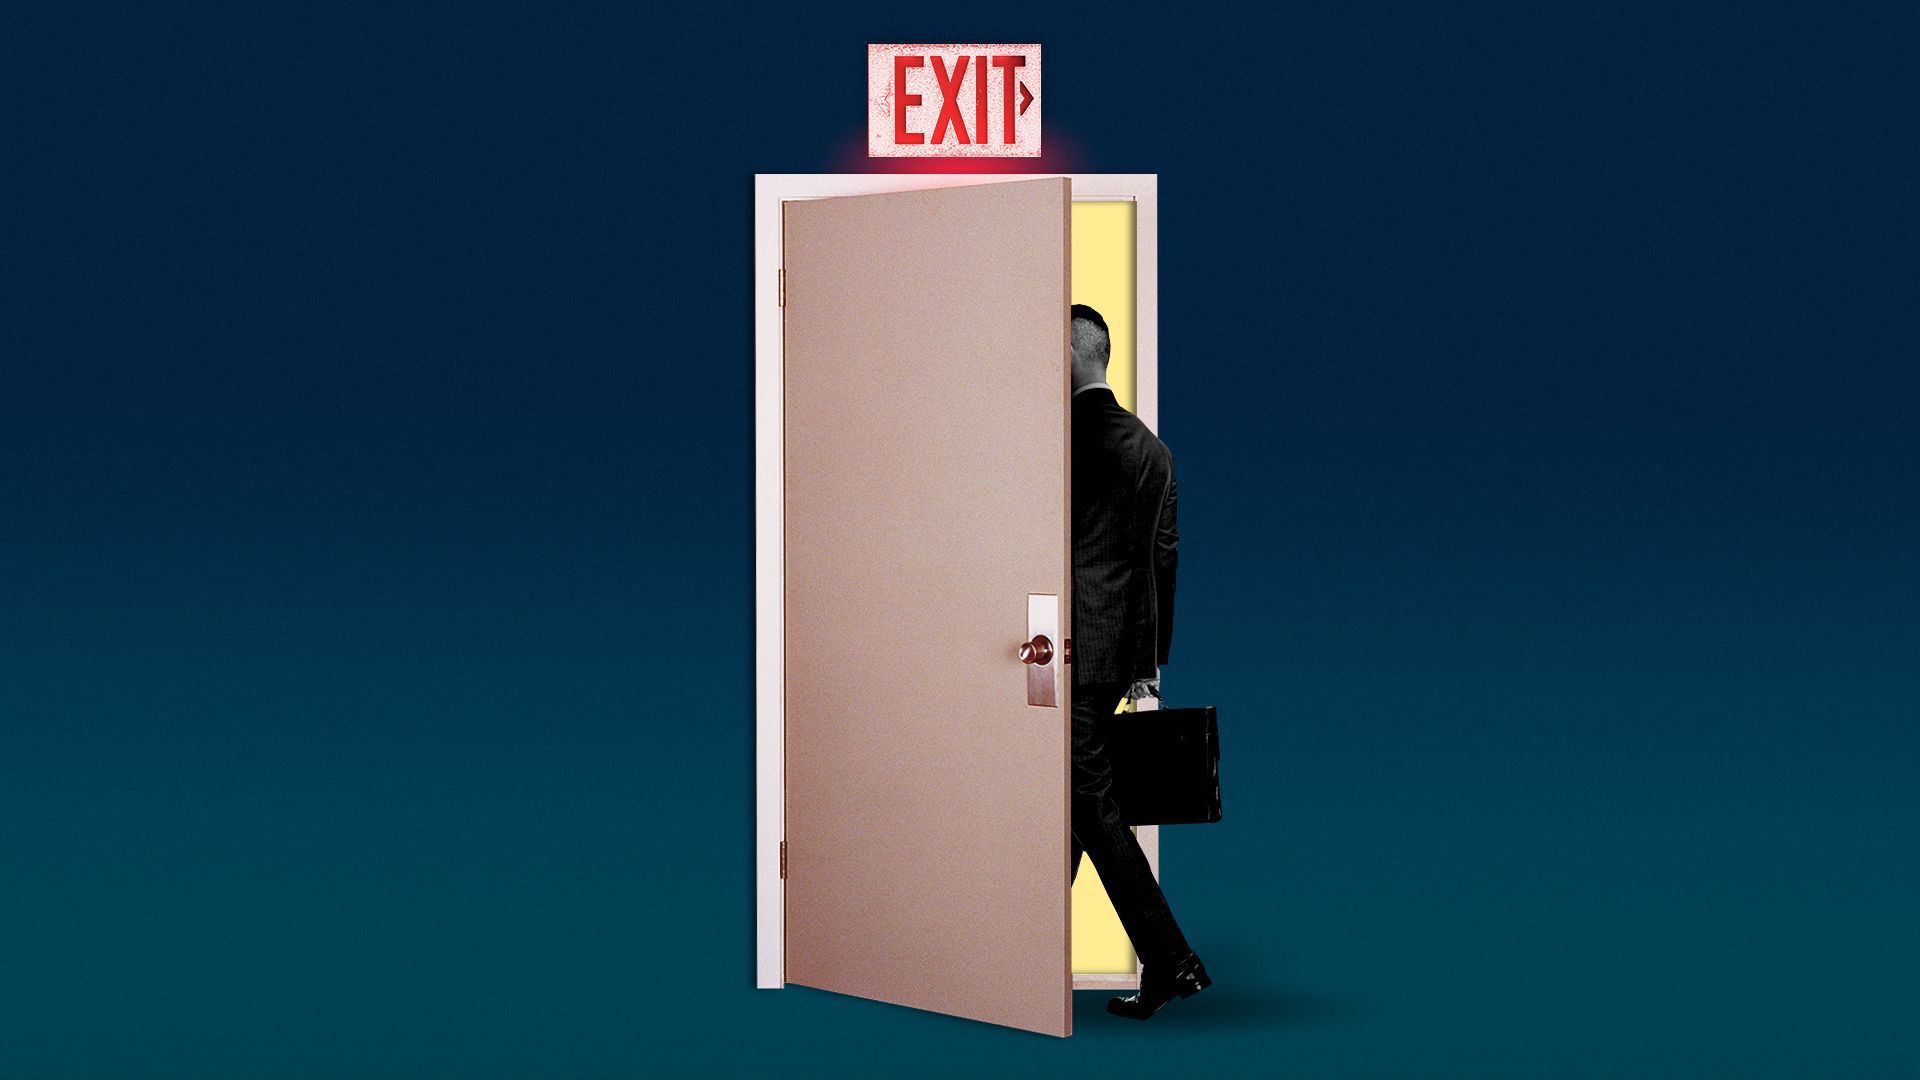 Illustration of a person leaving through a door.